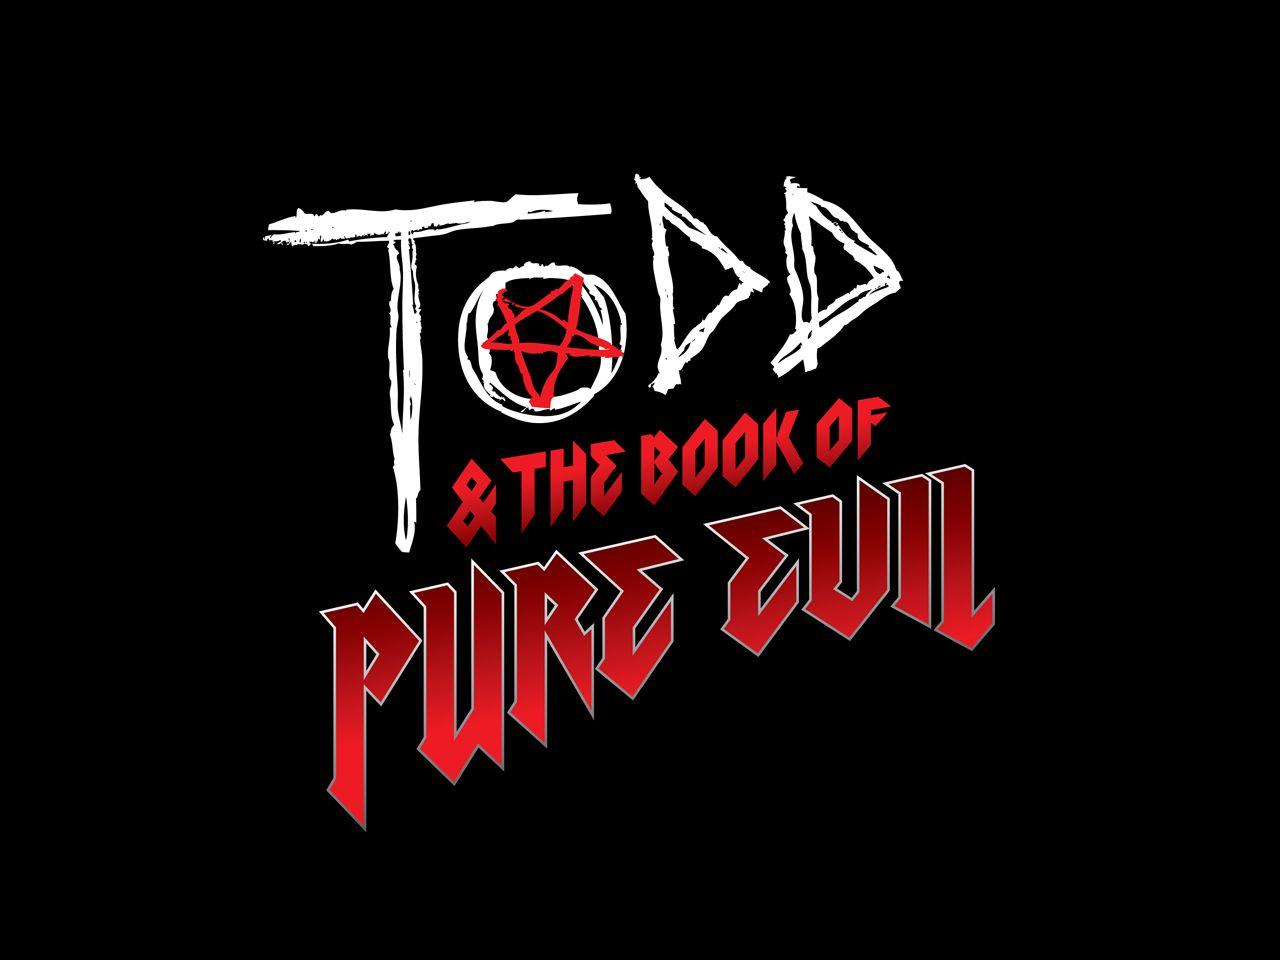 Todd Logo - Digital Swag « Todd & The Book of Pure Evil